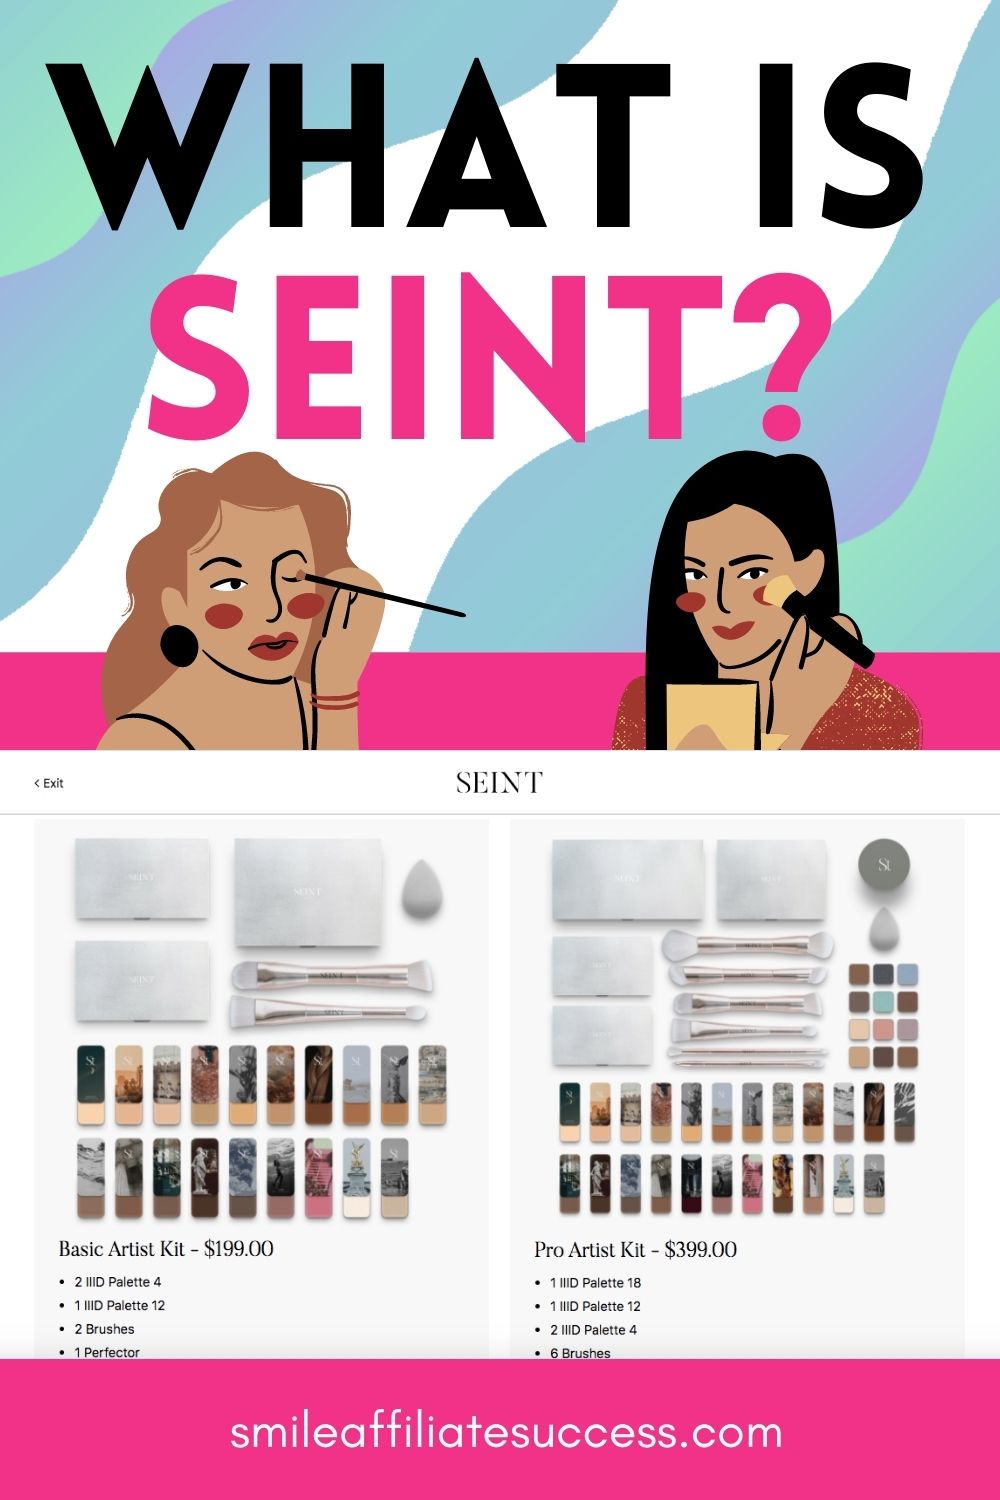 What Is Seint?